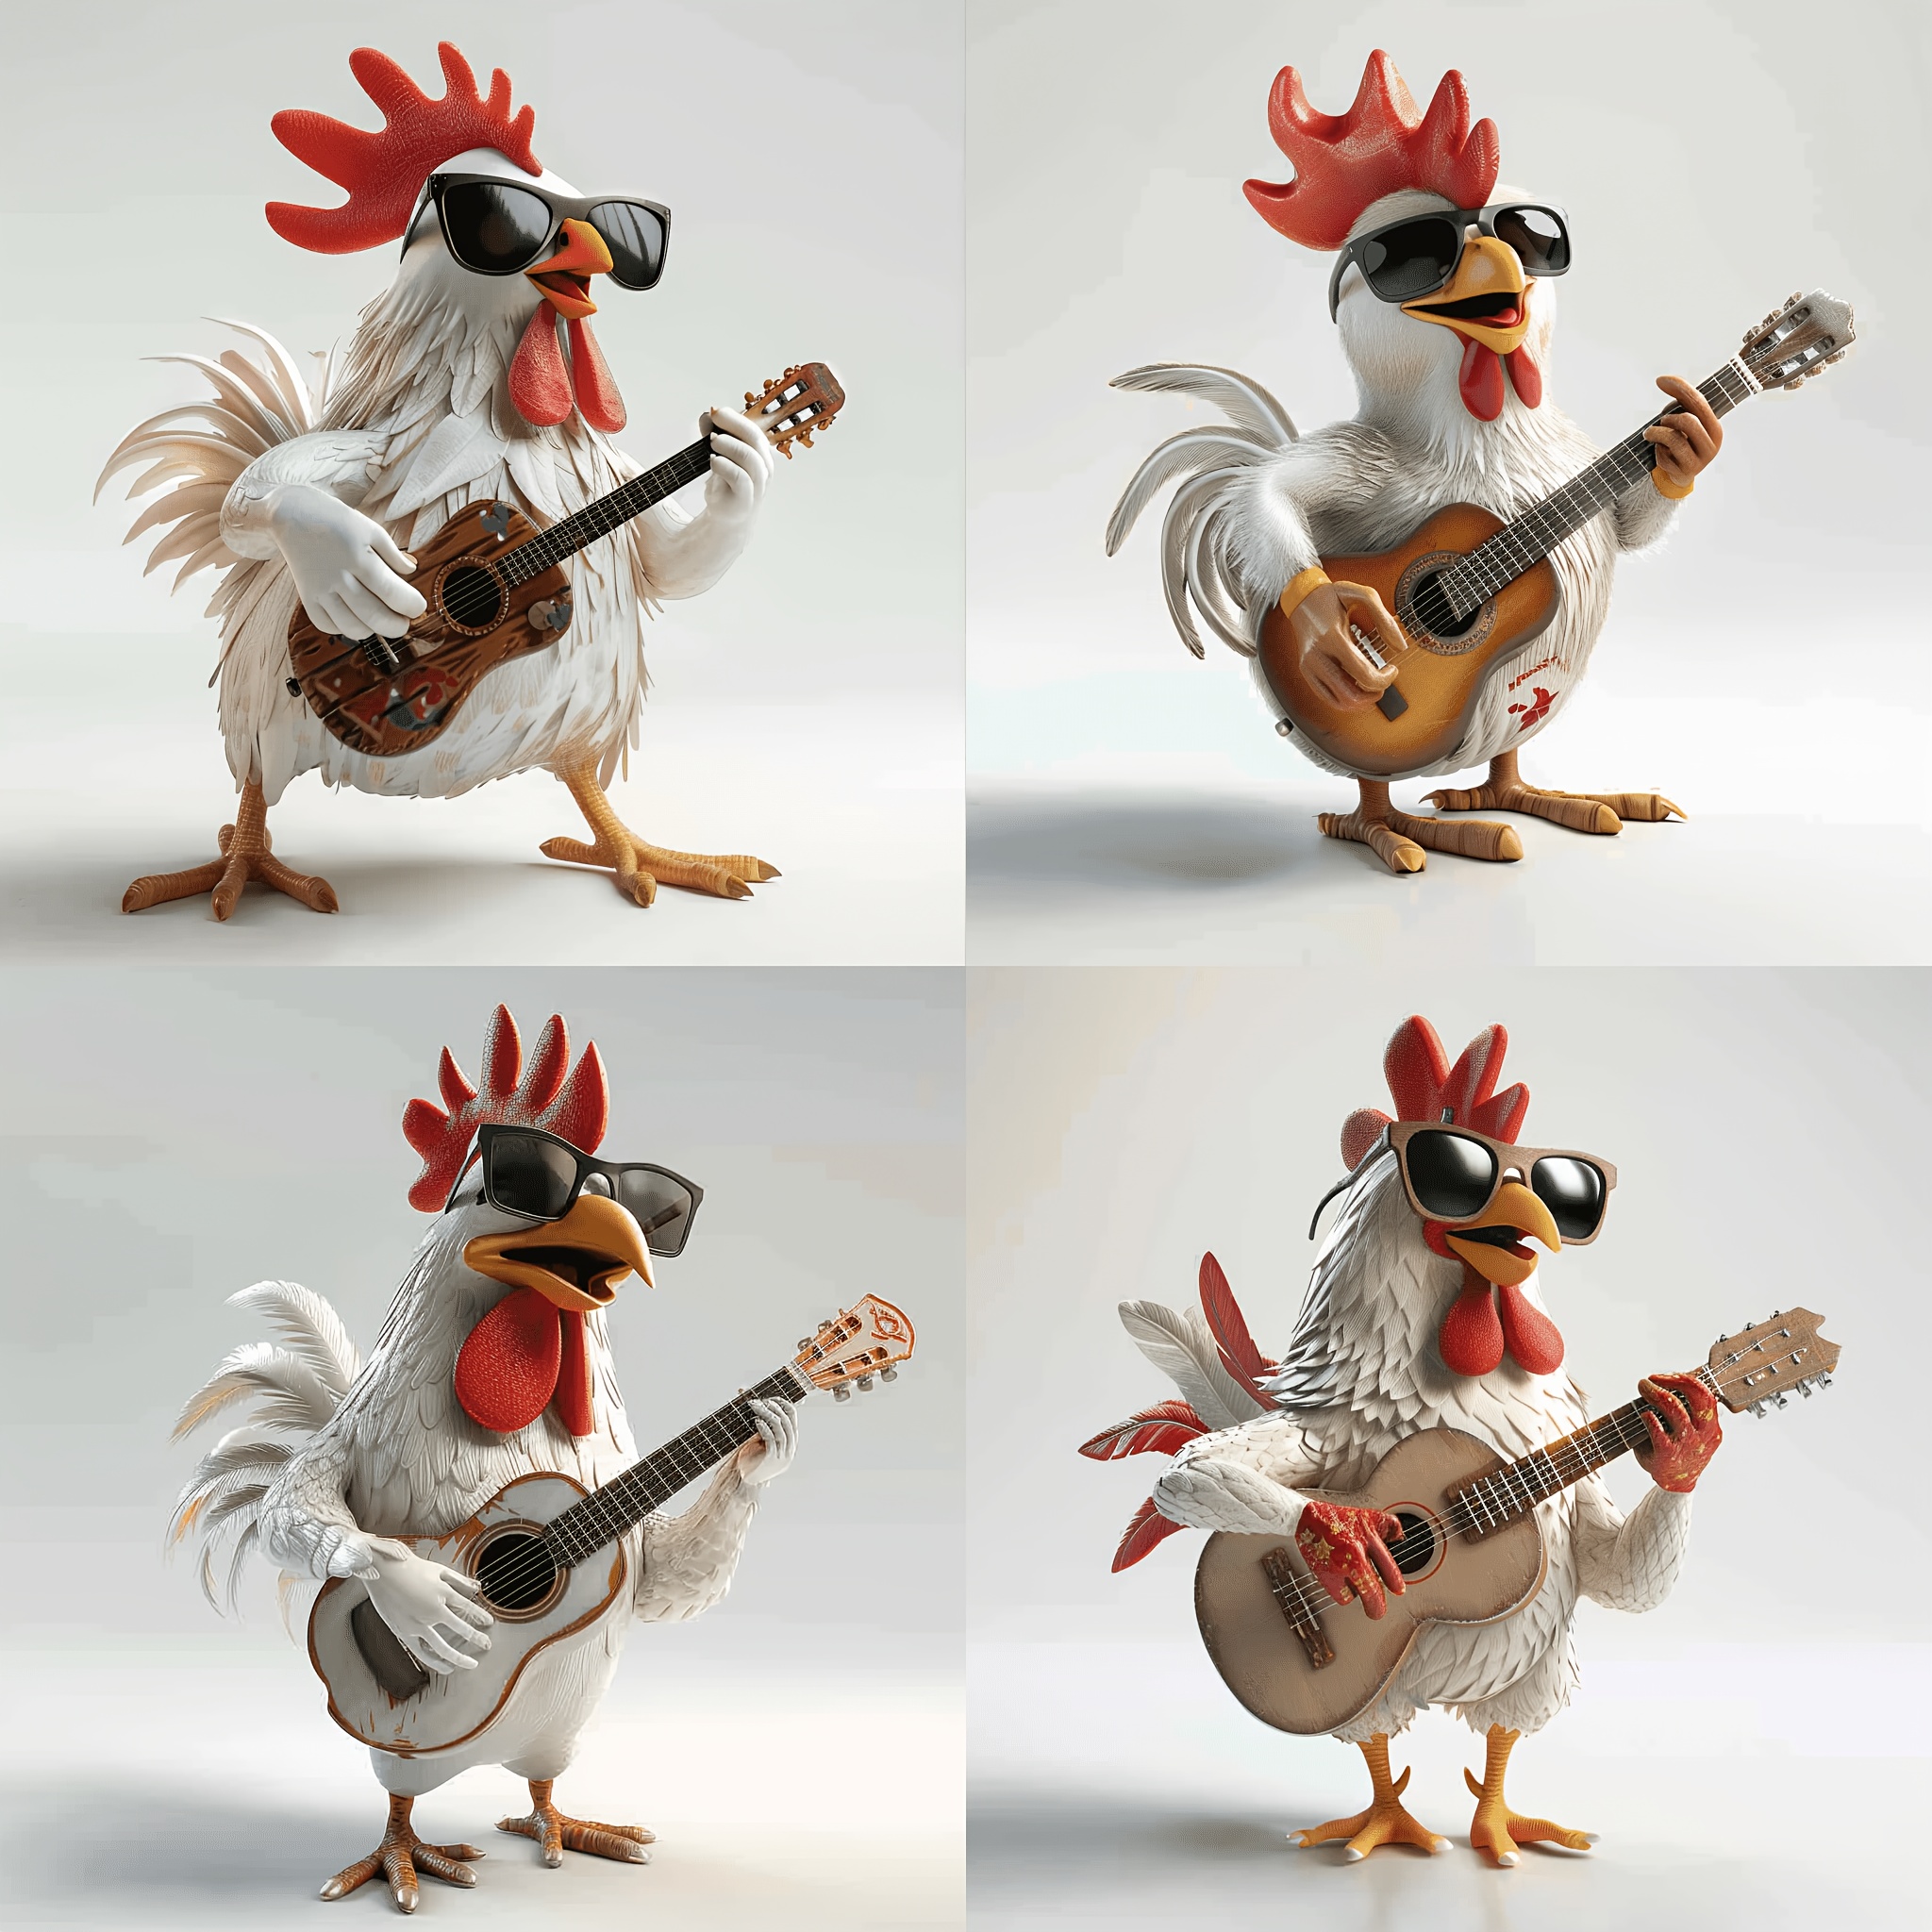 

4in1 Creative Stickers White Chicken With Glasses Playing Guitar Car Stickers Stickers Sunscreen Opaque Apply To Cars, Doors, Windows, Refrigerator Location Whole Plate Engraving